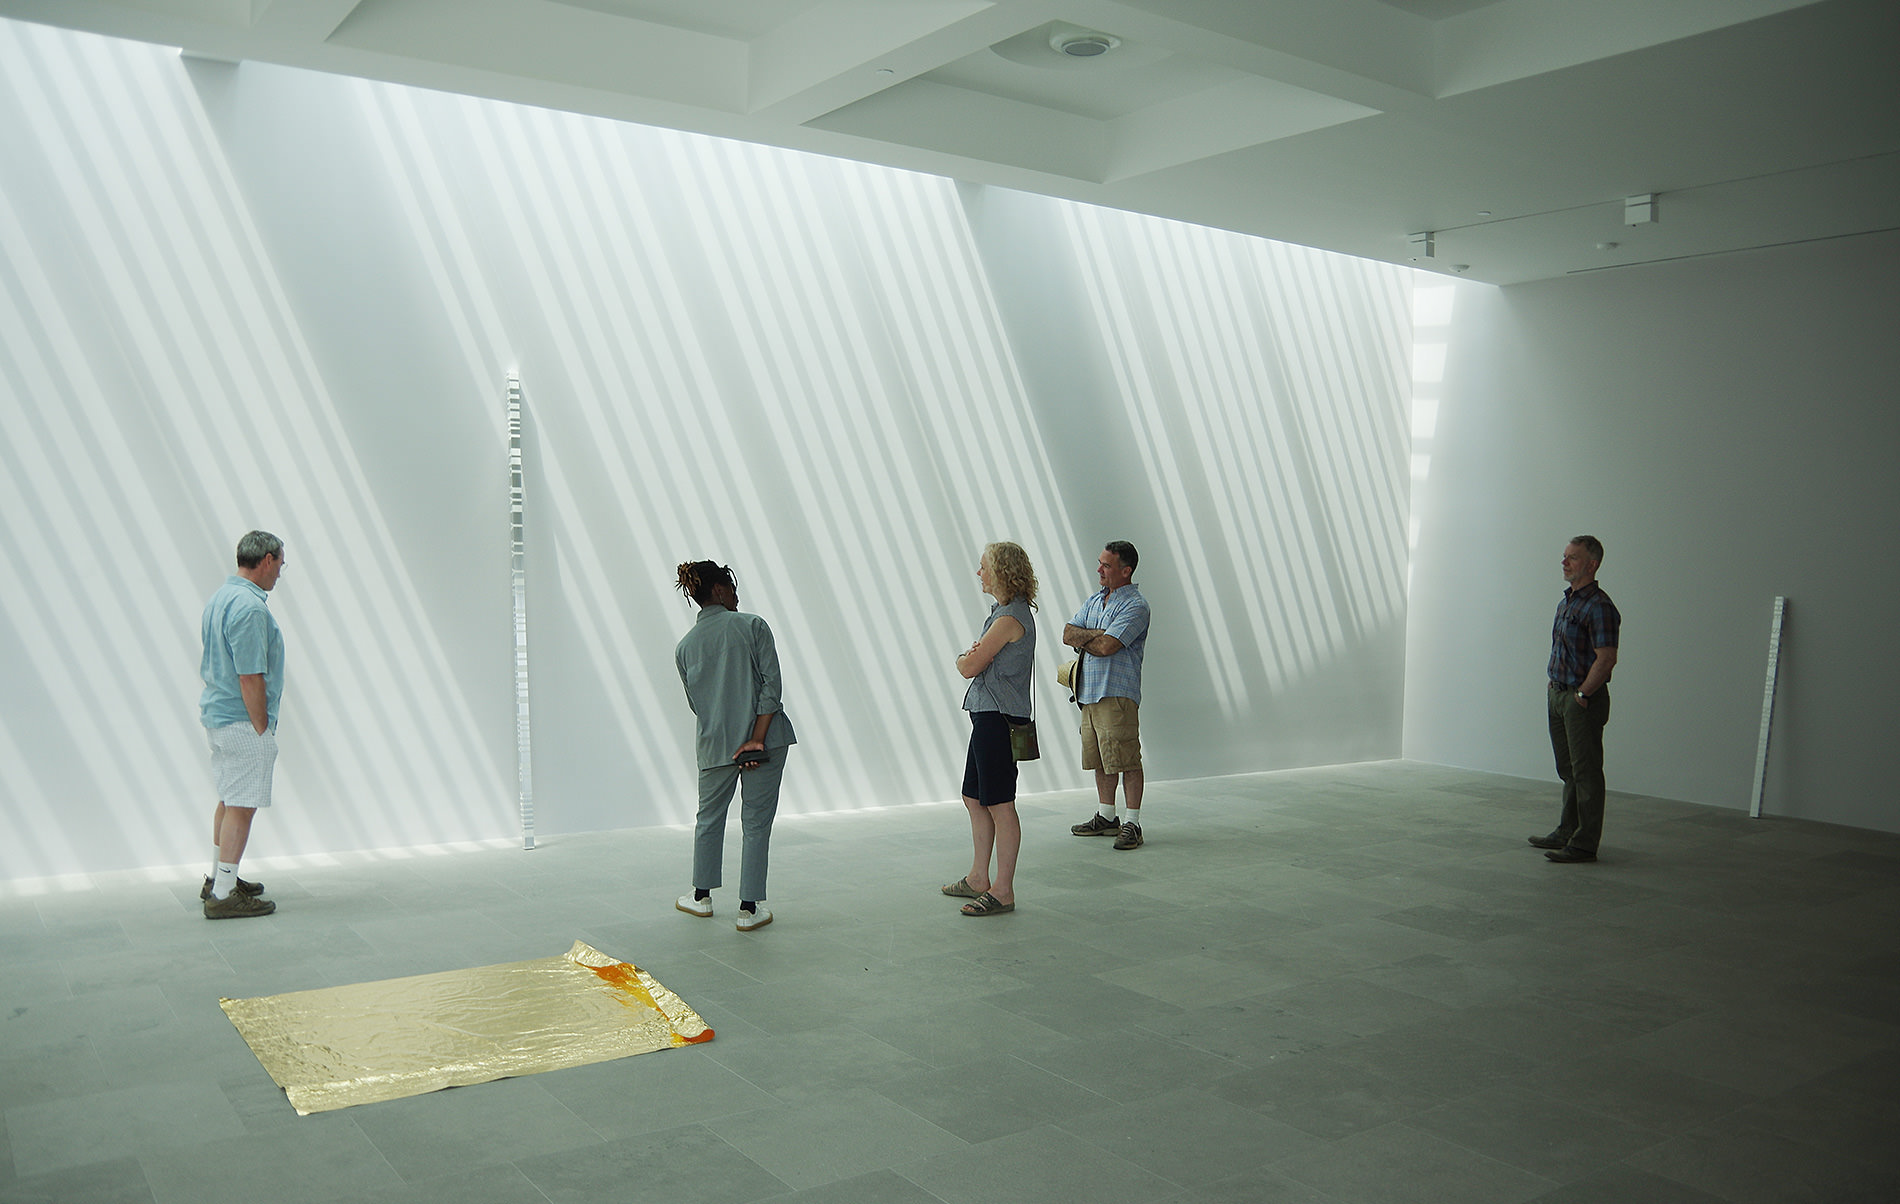 Five people, one dessed all in grey, converse in a room with white walls and gray stone floor, near gold and translucent sculptures.